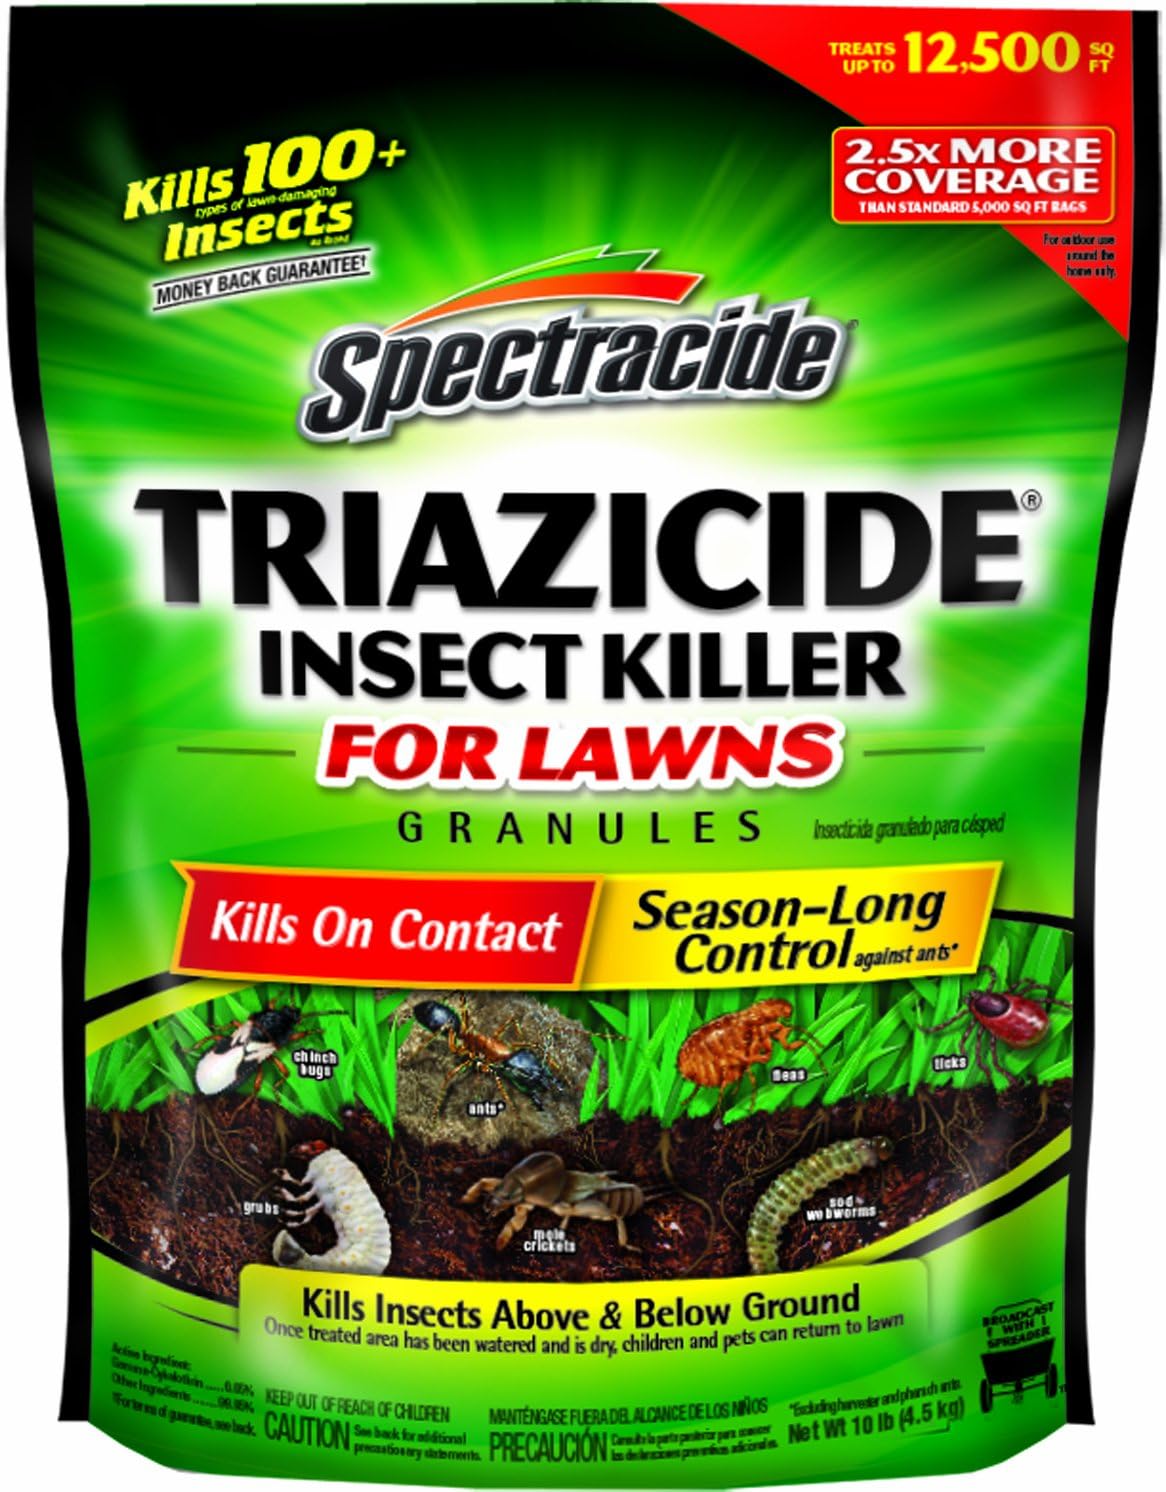 Spectracide Triazicide Insect Killer For Lawns [...]